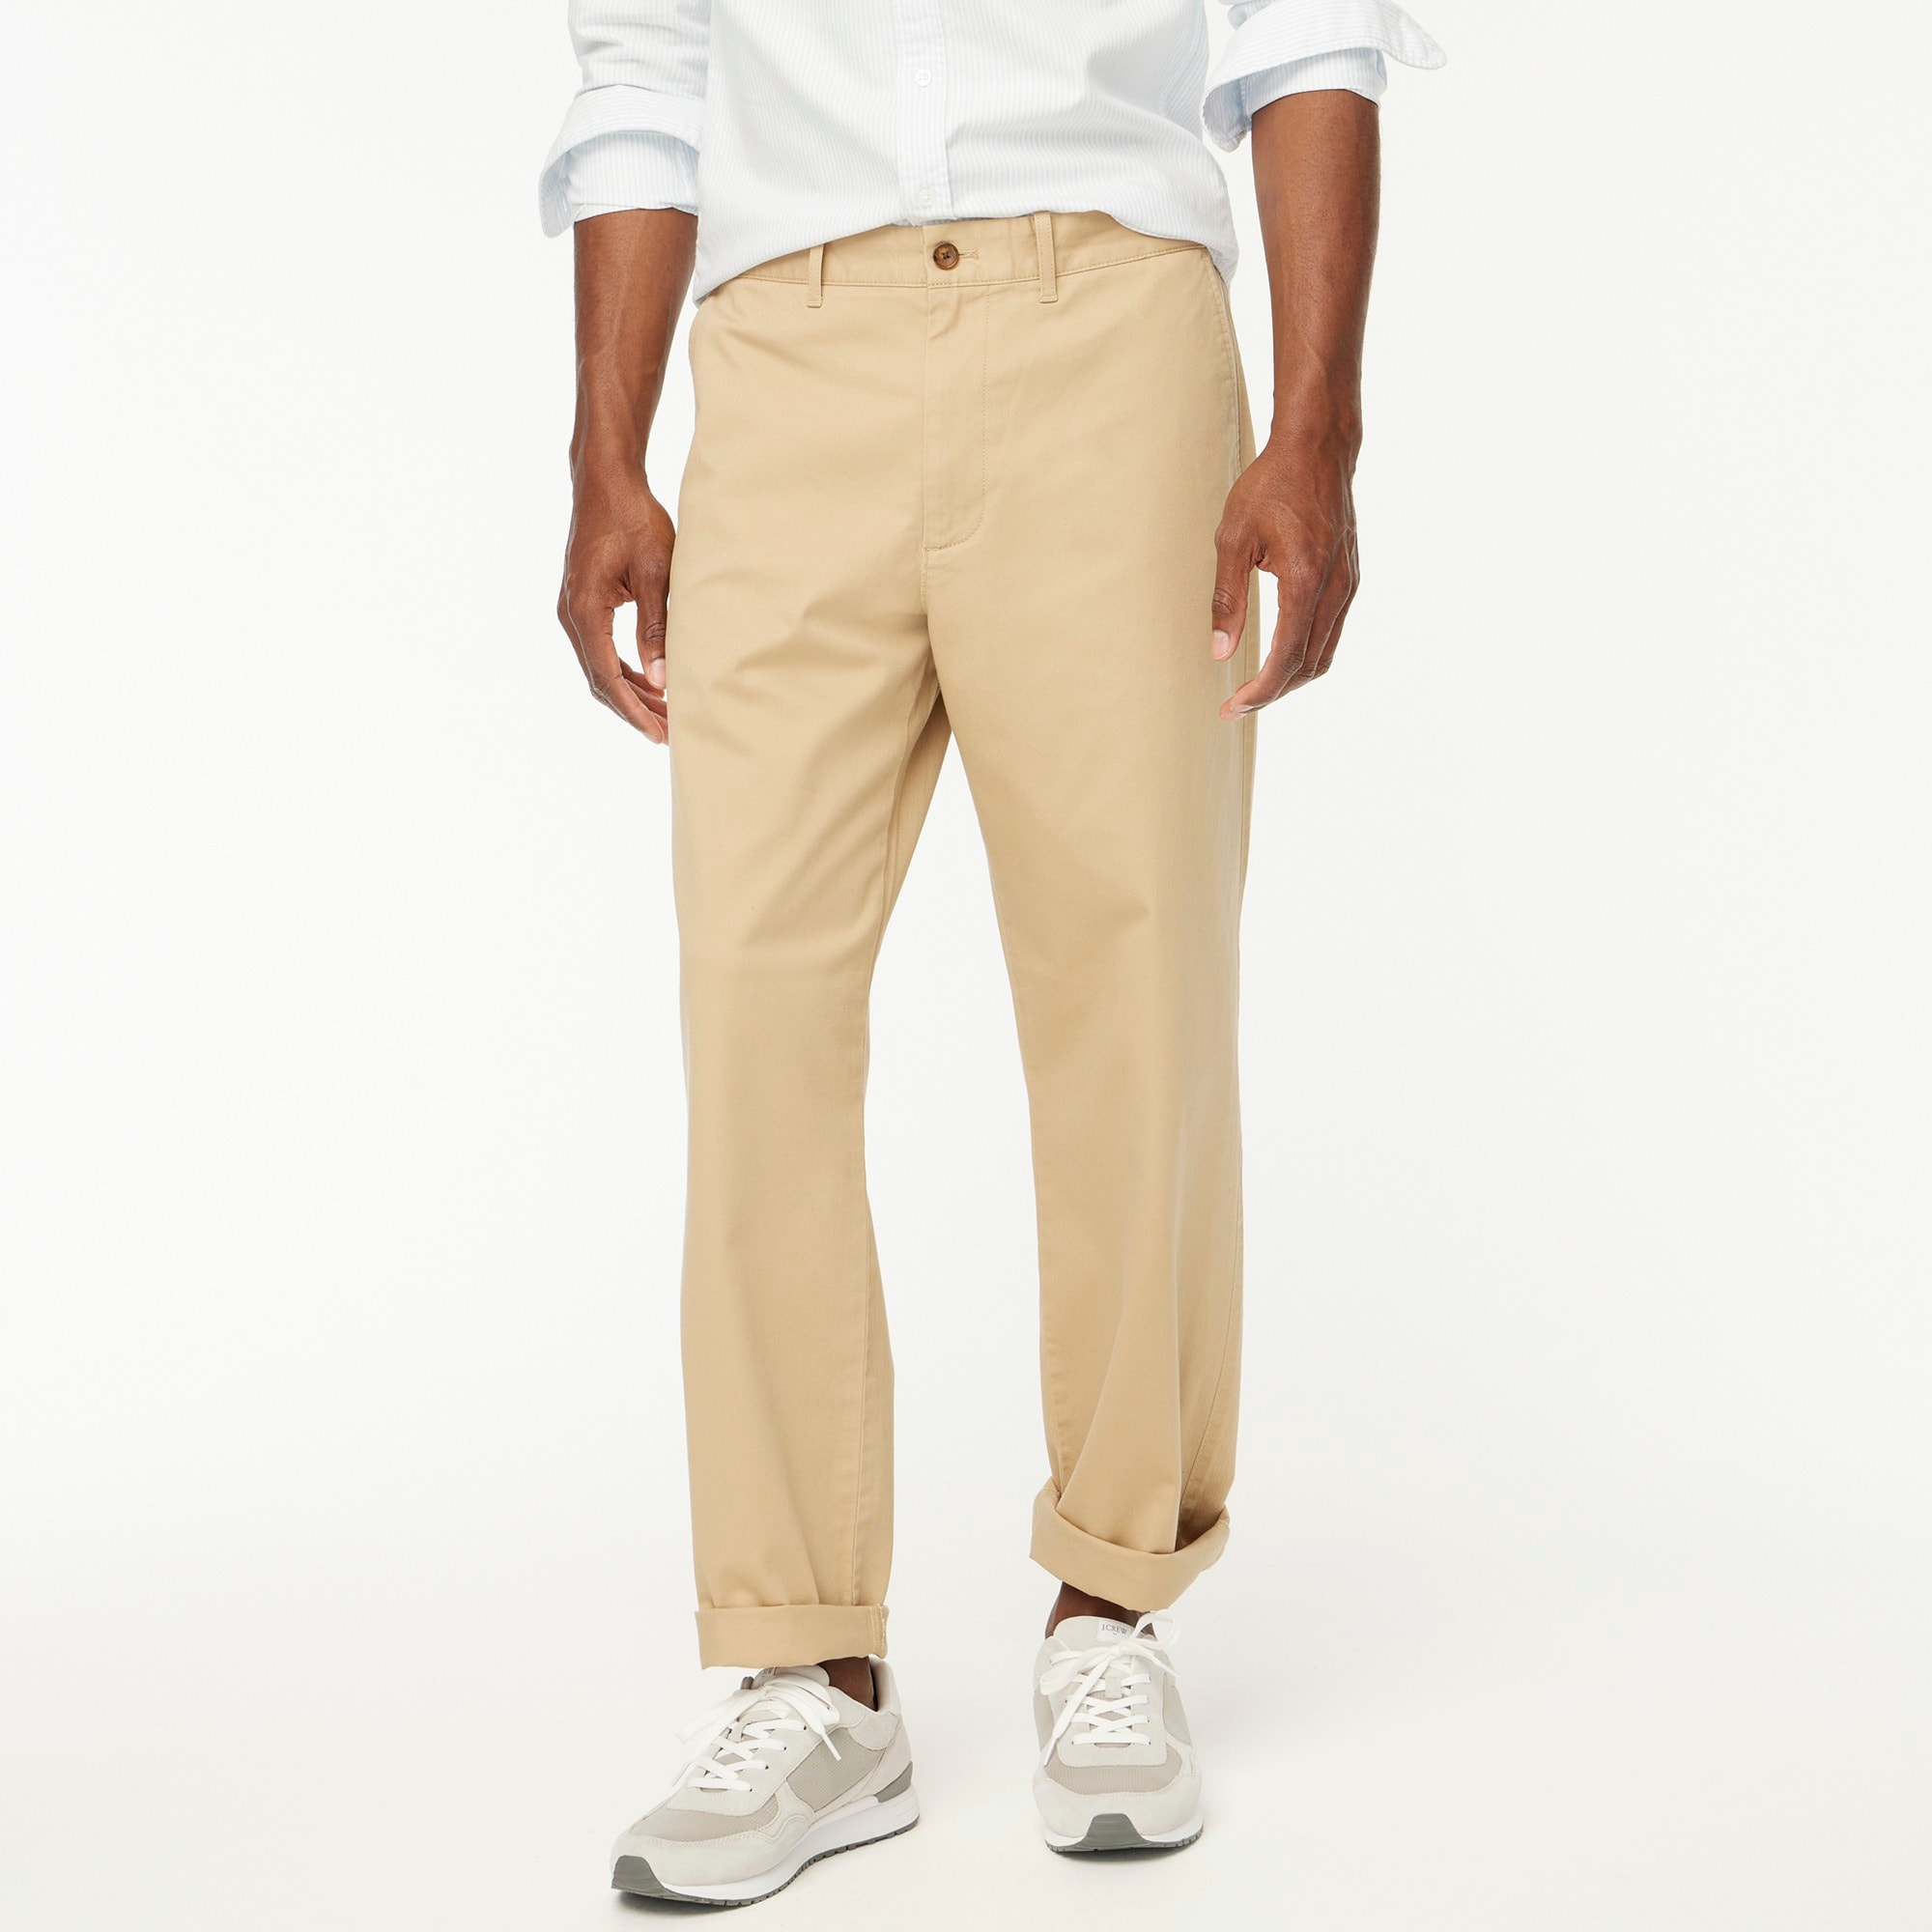 Relaxed-fit flex chino pant